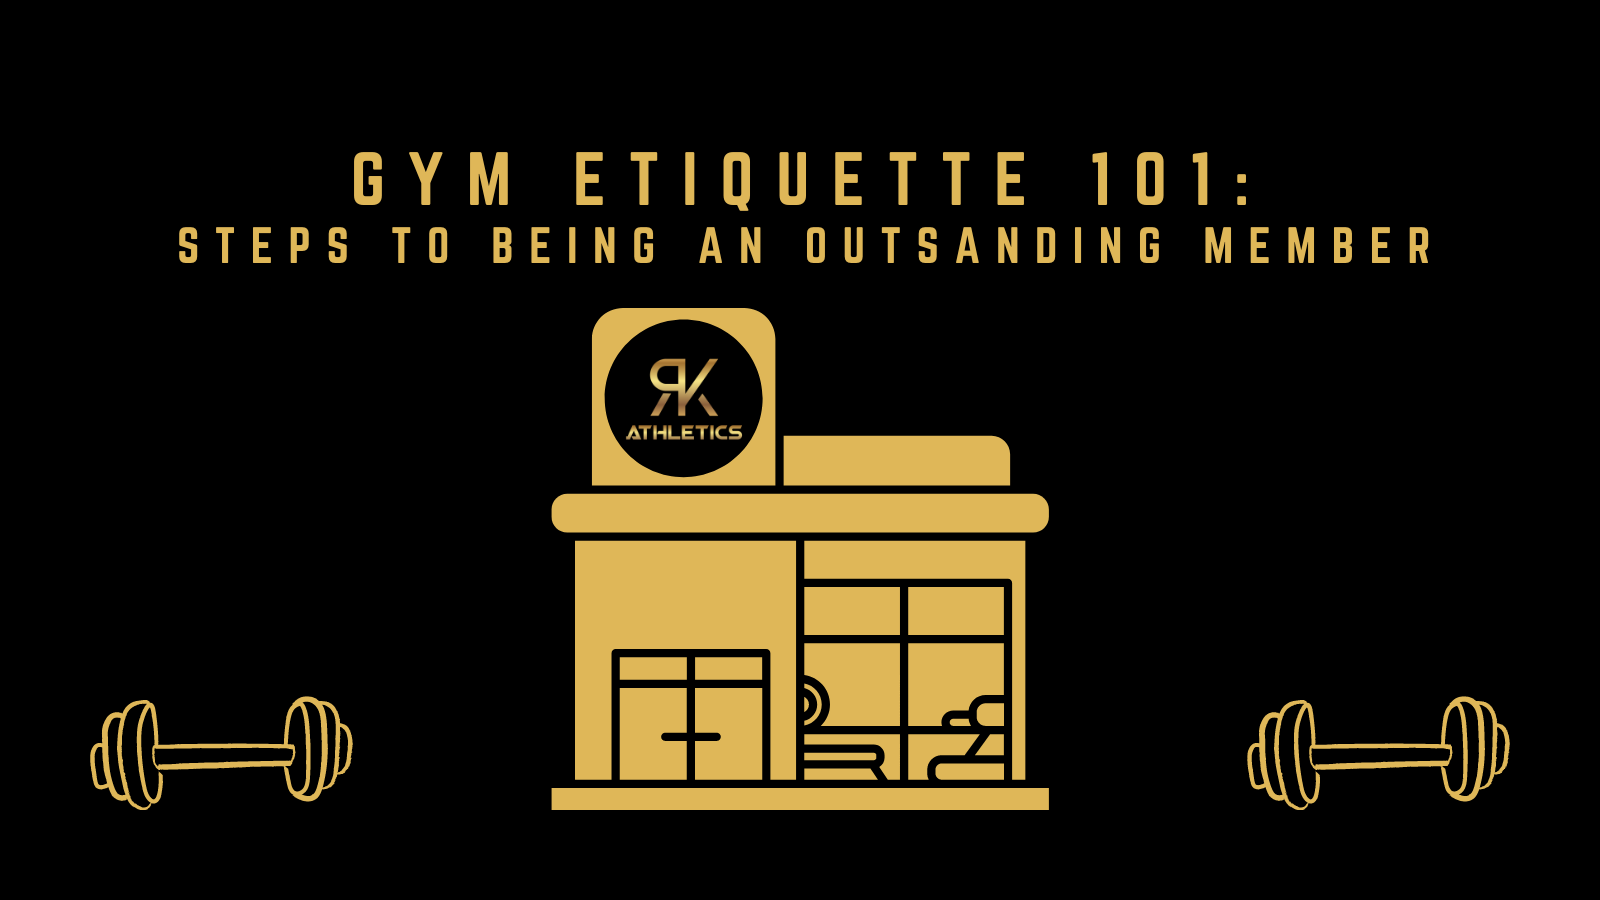 Gym Etiquette 101: Steps to Being an Outstanding Member